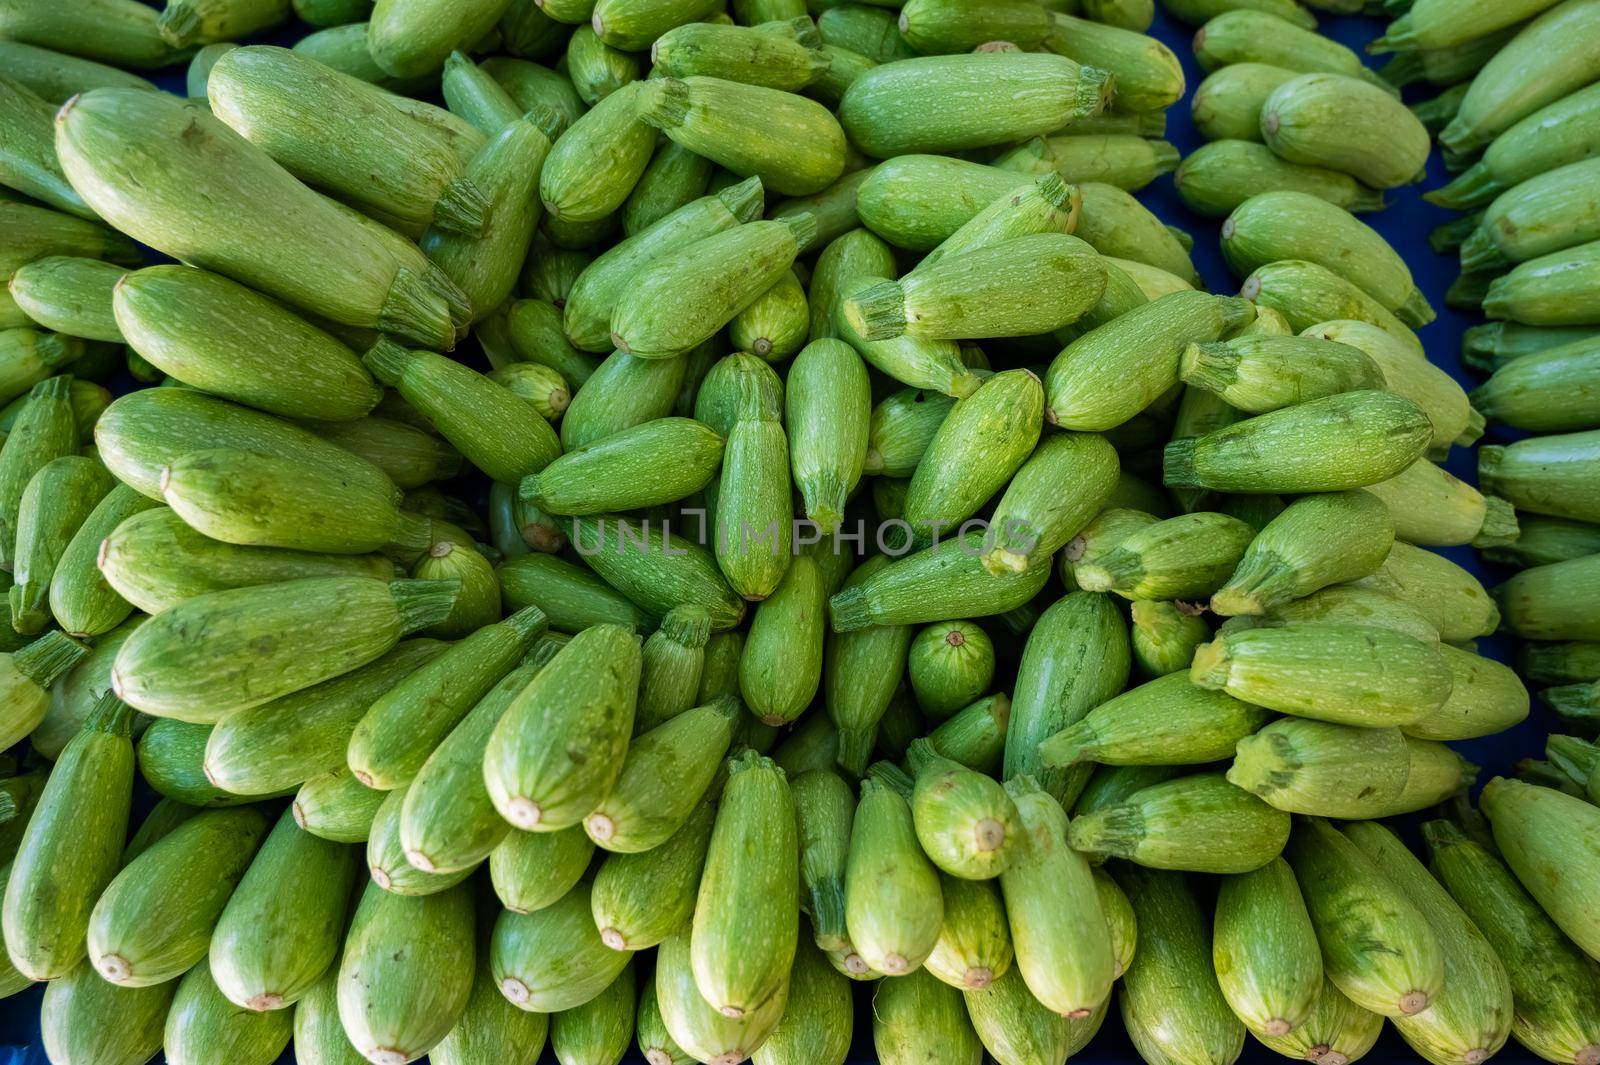 A bunch of zucchini on the bazaar counter